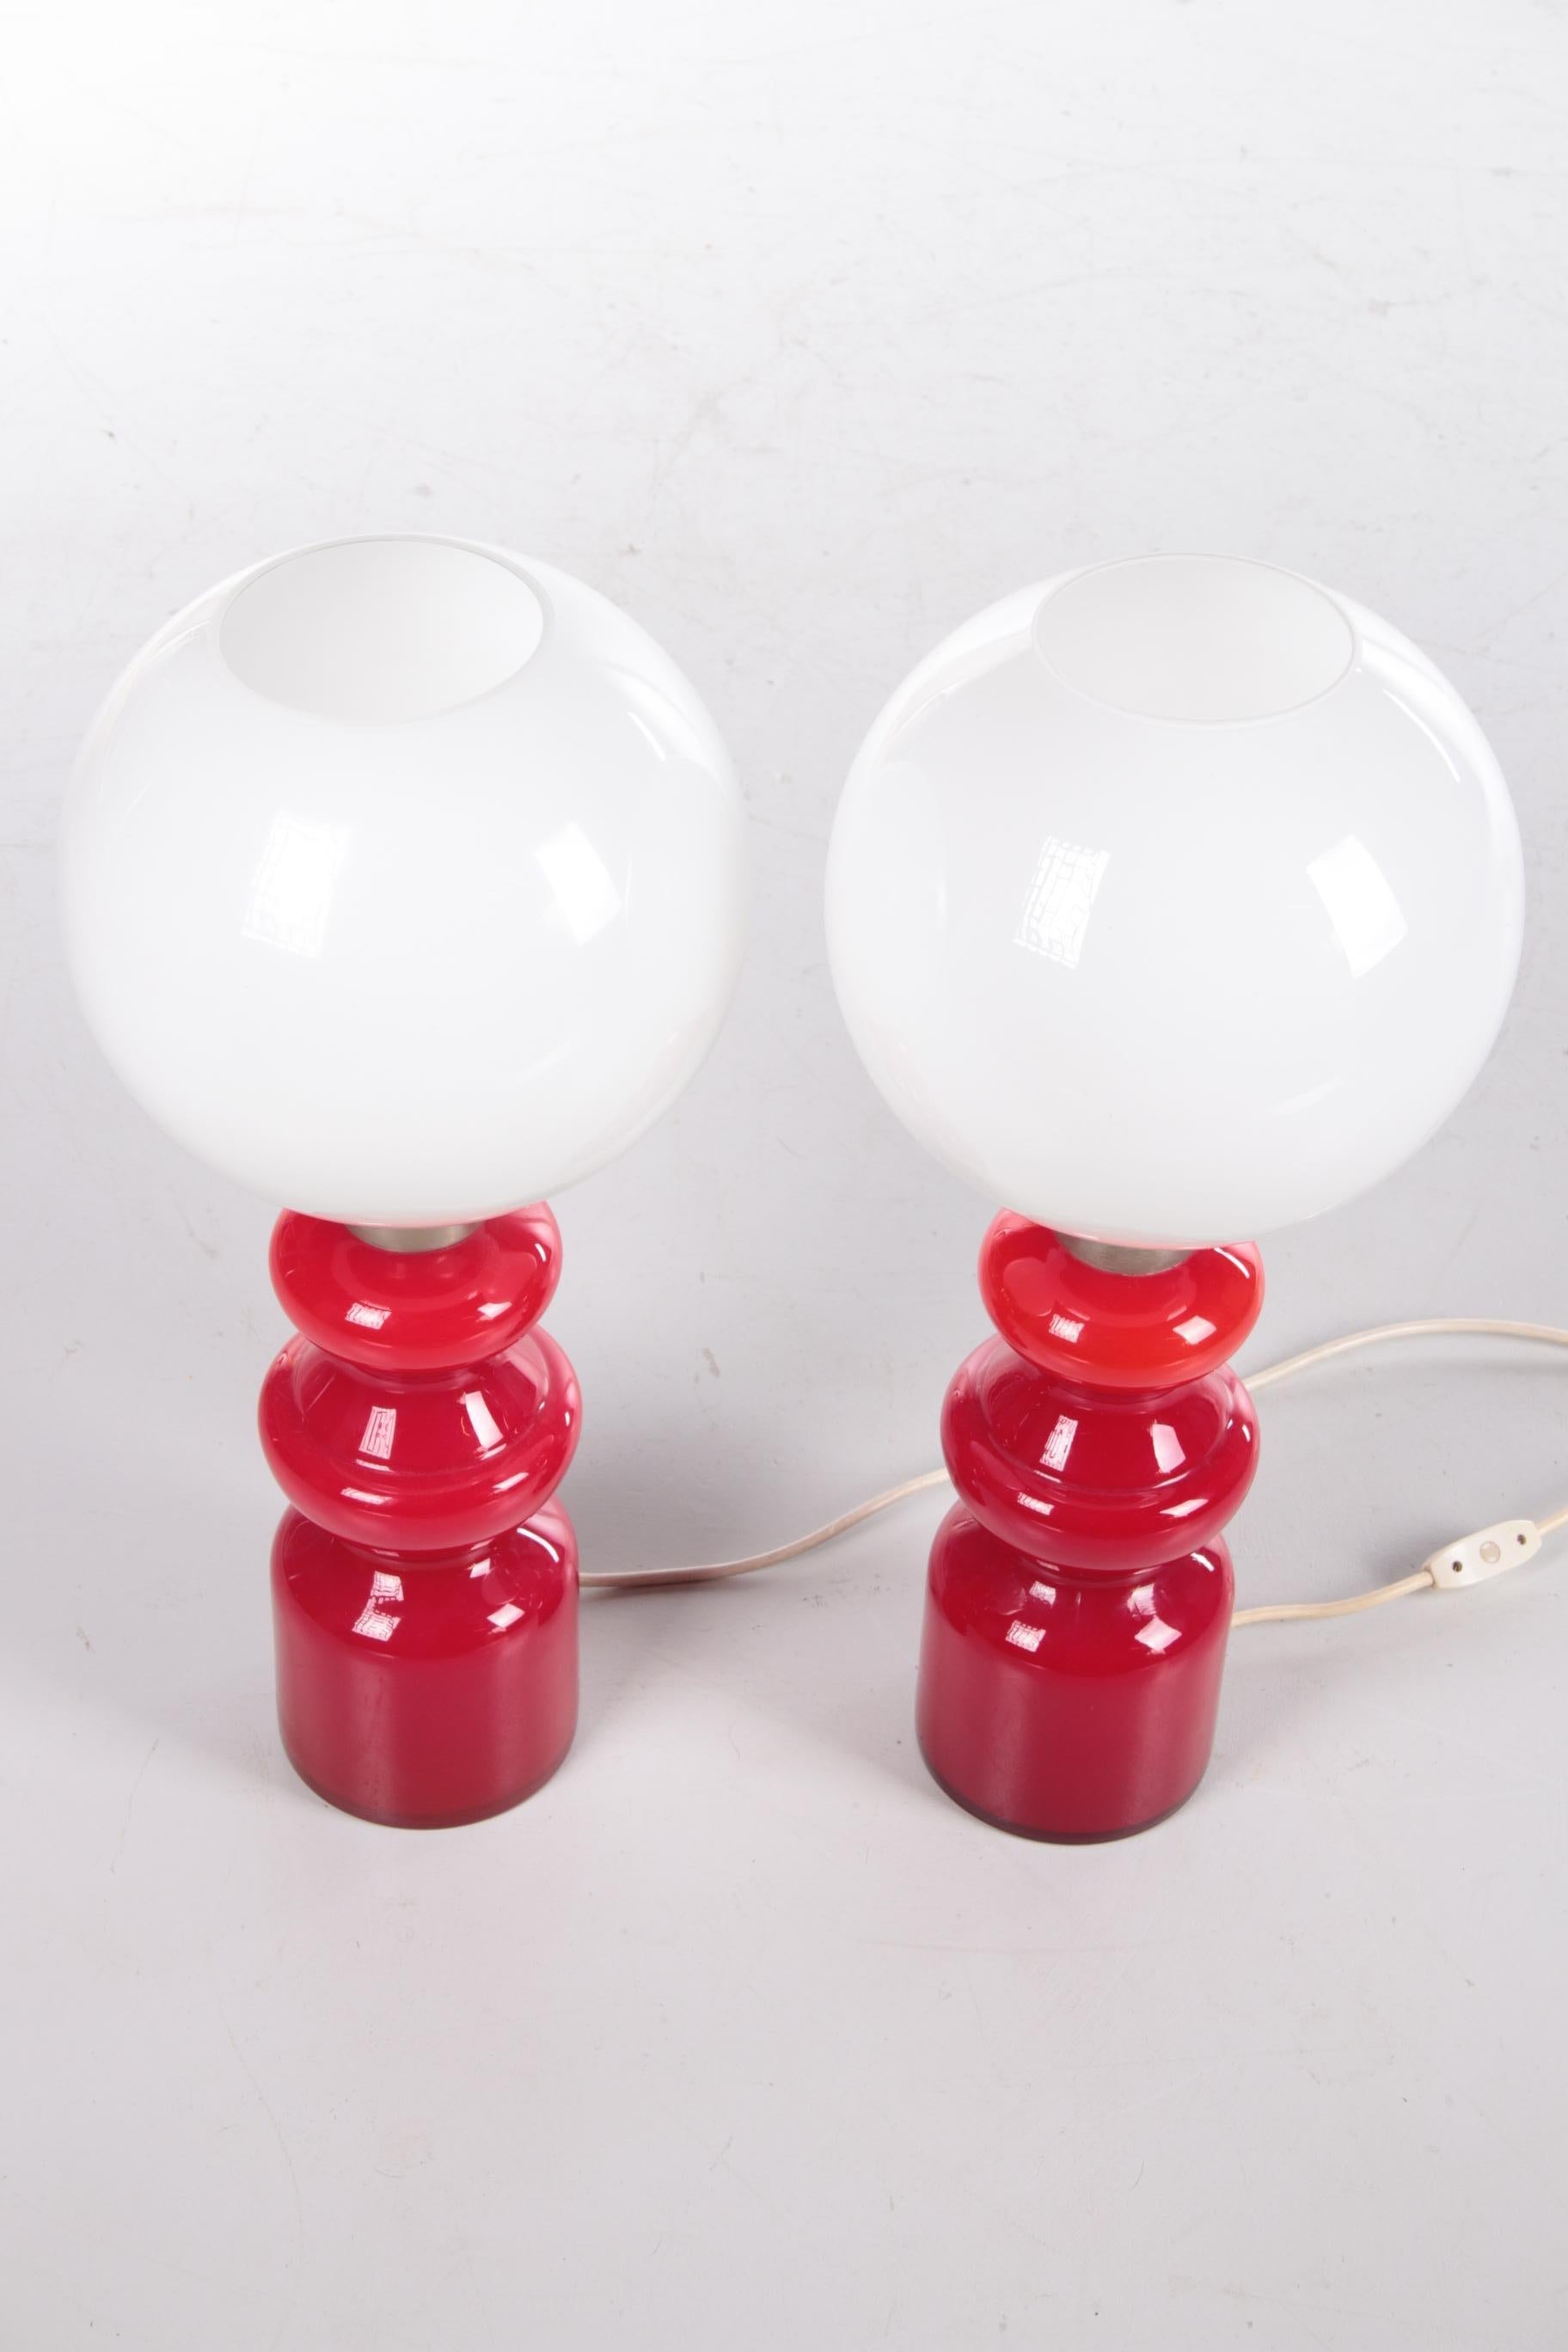 Two Big Glass Table Lamps Vintage Retro Red and White Table Lamps, 1970s 2